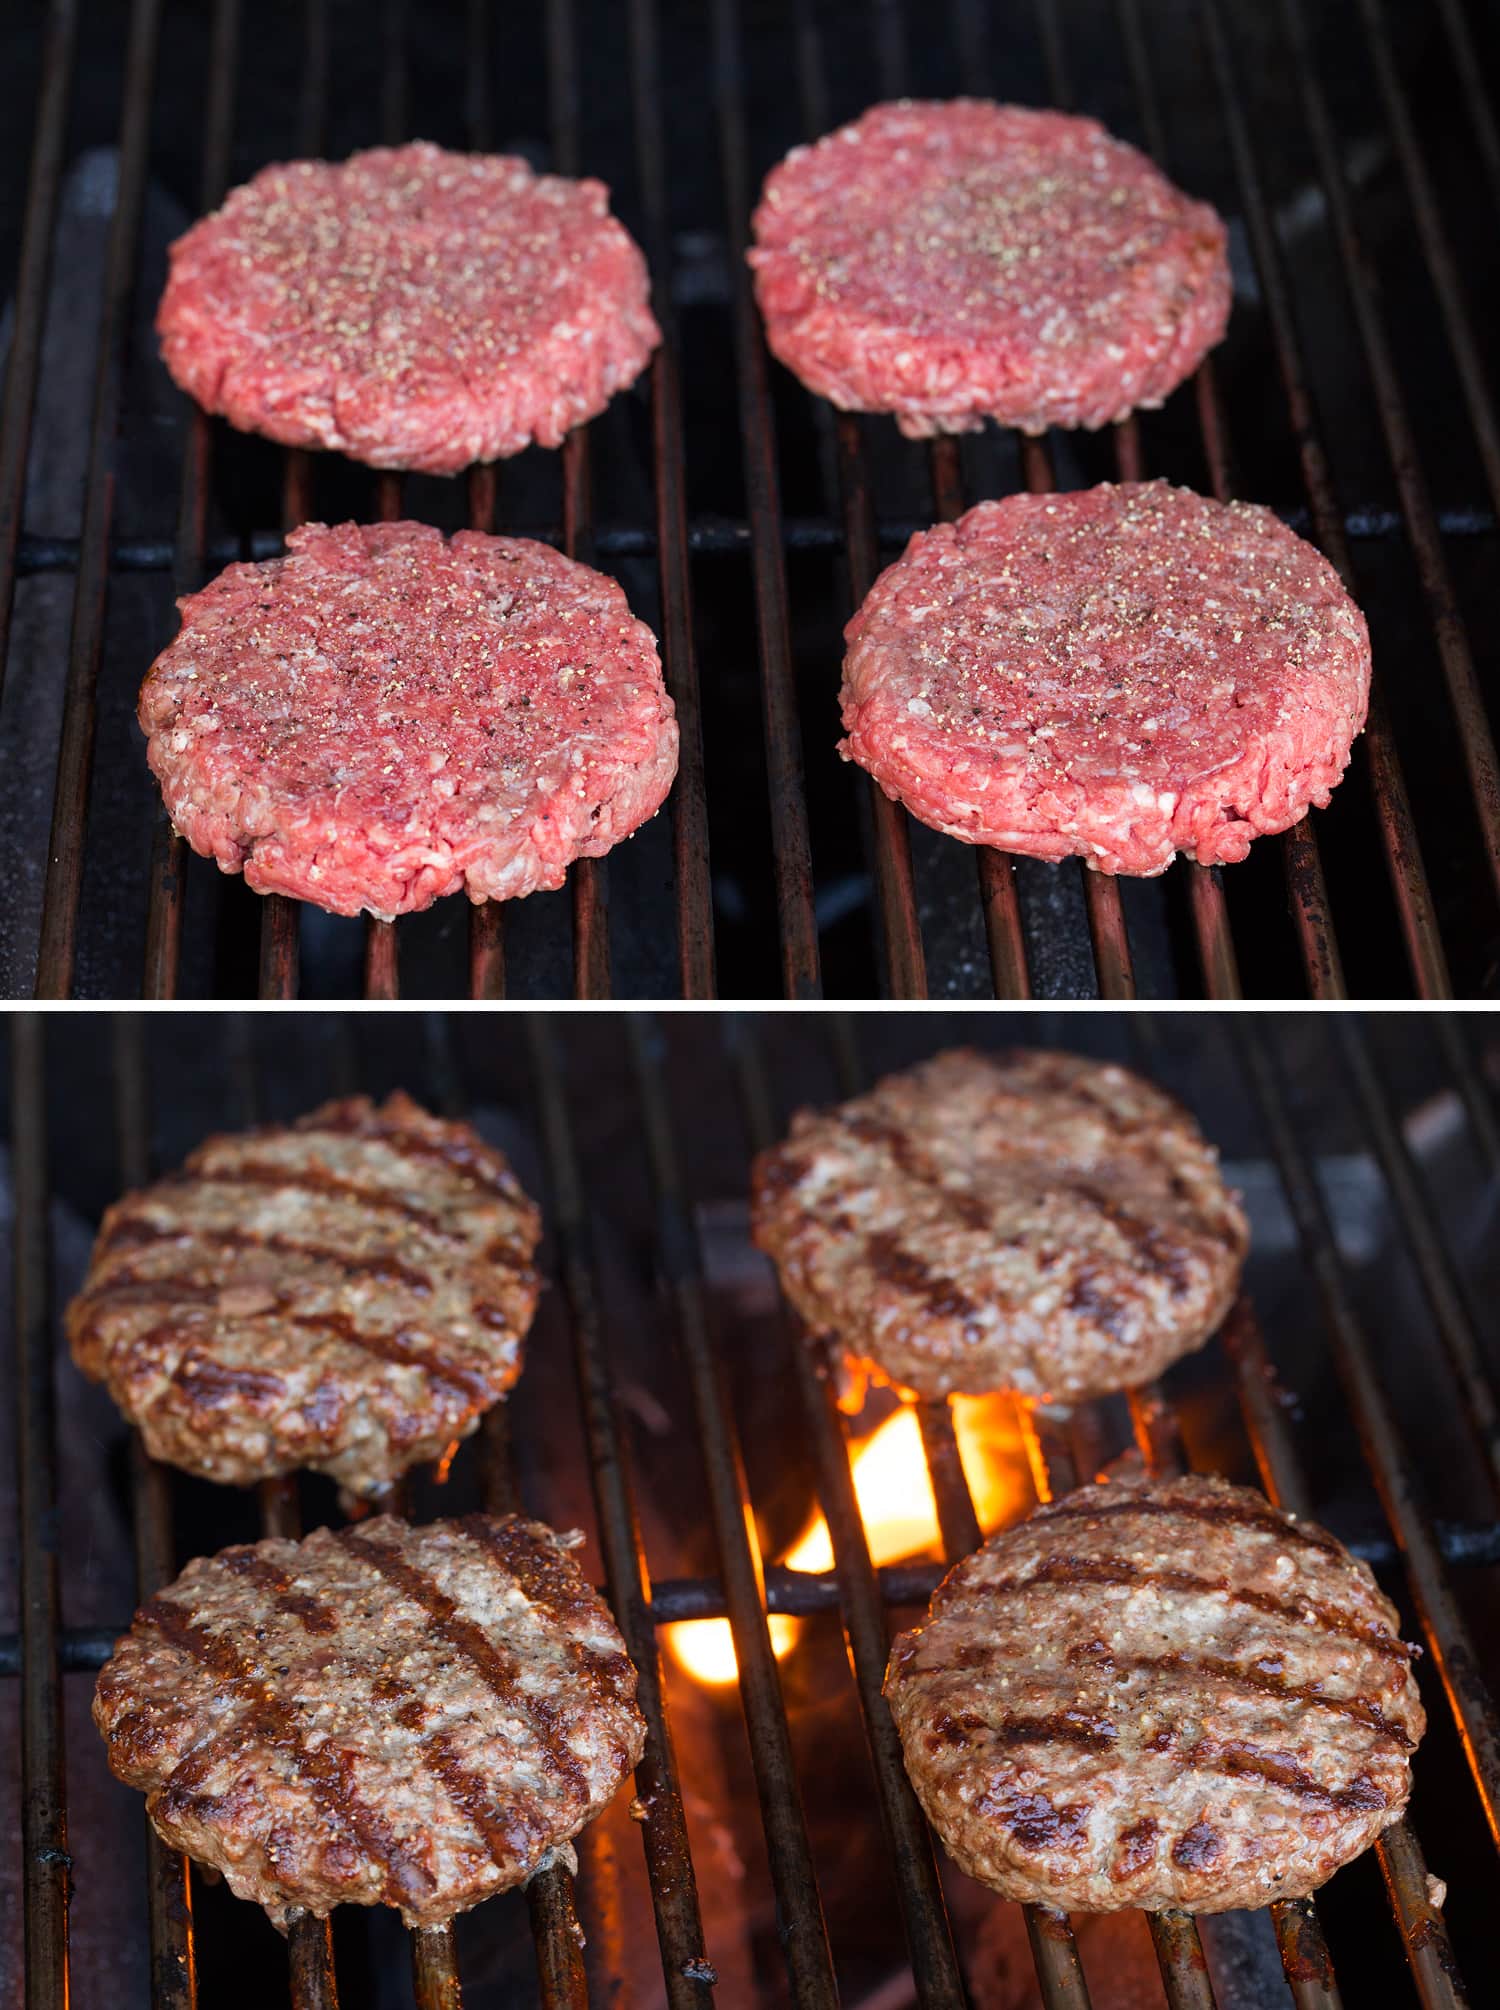 Cooking hamburgers on the grill.